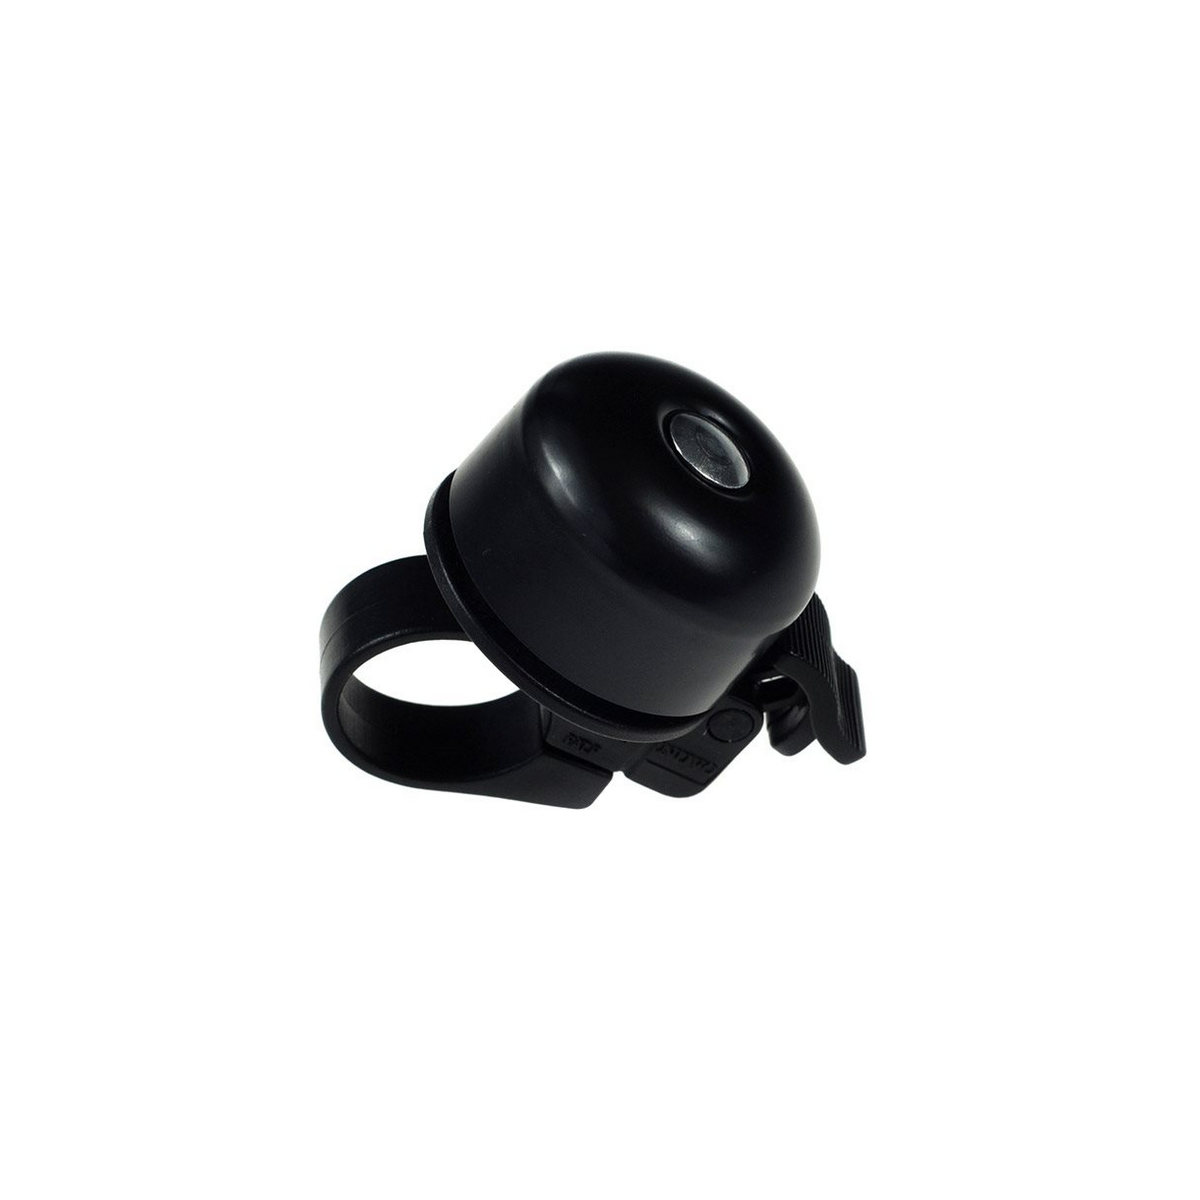 Small ping bell black